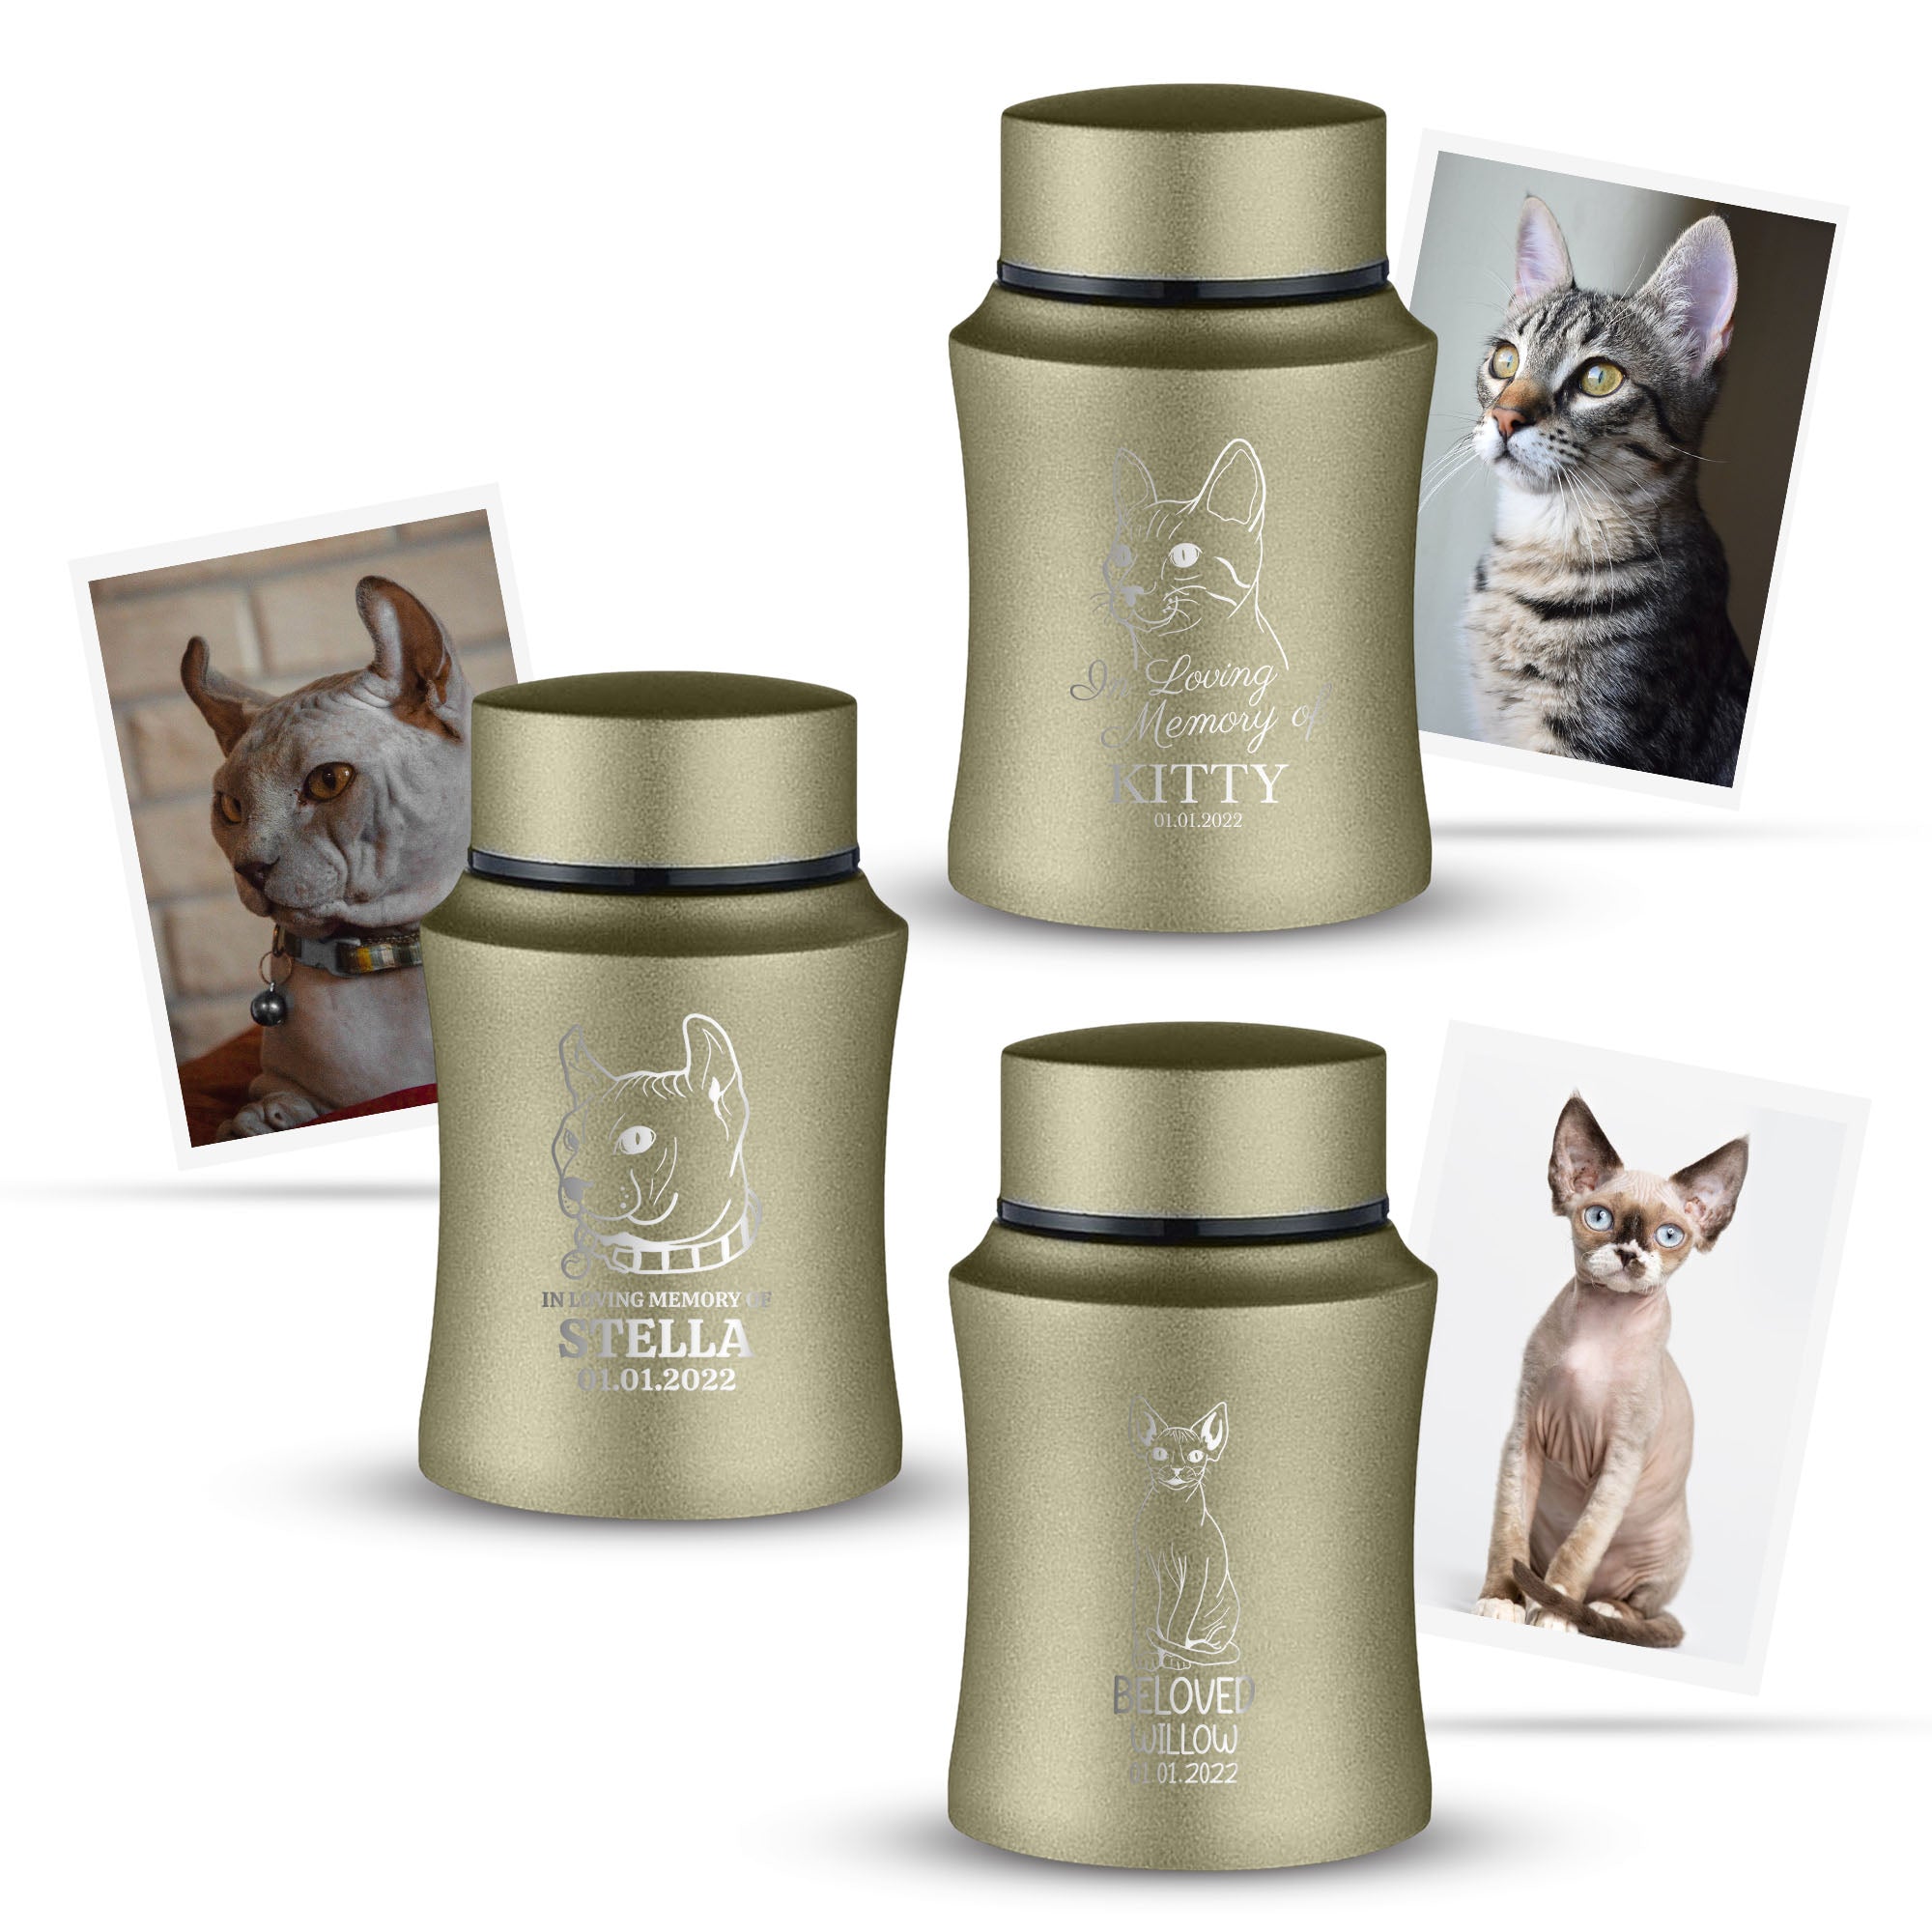 Custom Engraved Pet Photo/Image Keepsake Urn - Personalized with Pet Name, Date, and Pet Image - 4" Powder Coated Steel Cremation Mini Compact Urn for Pets Ashes, Washed Gold , Powder Blue , Gray | 5–10 Lbs Capacity